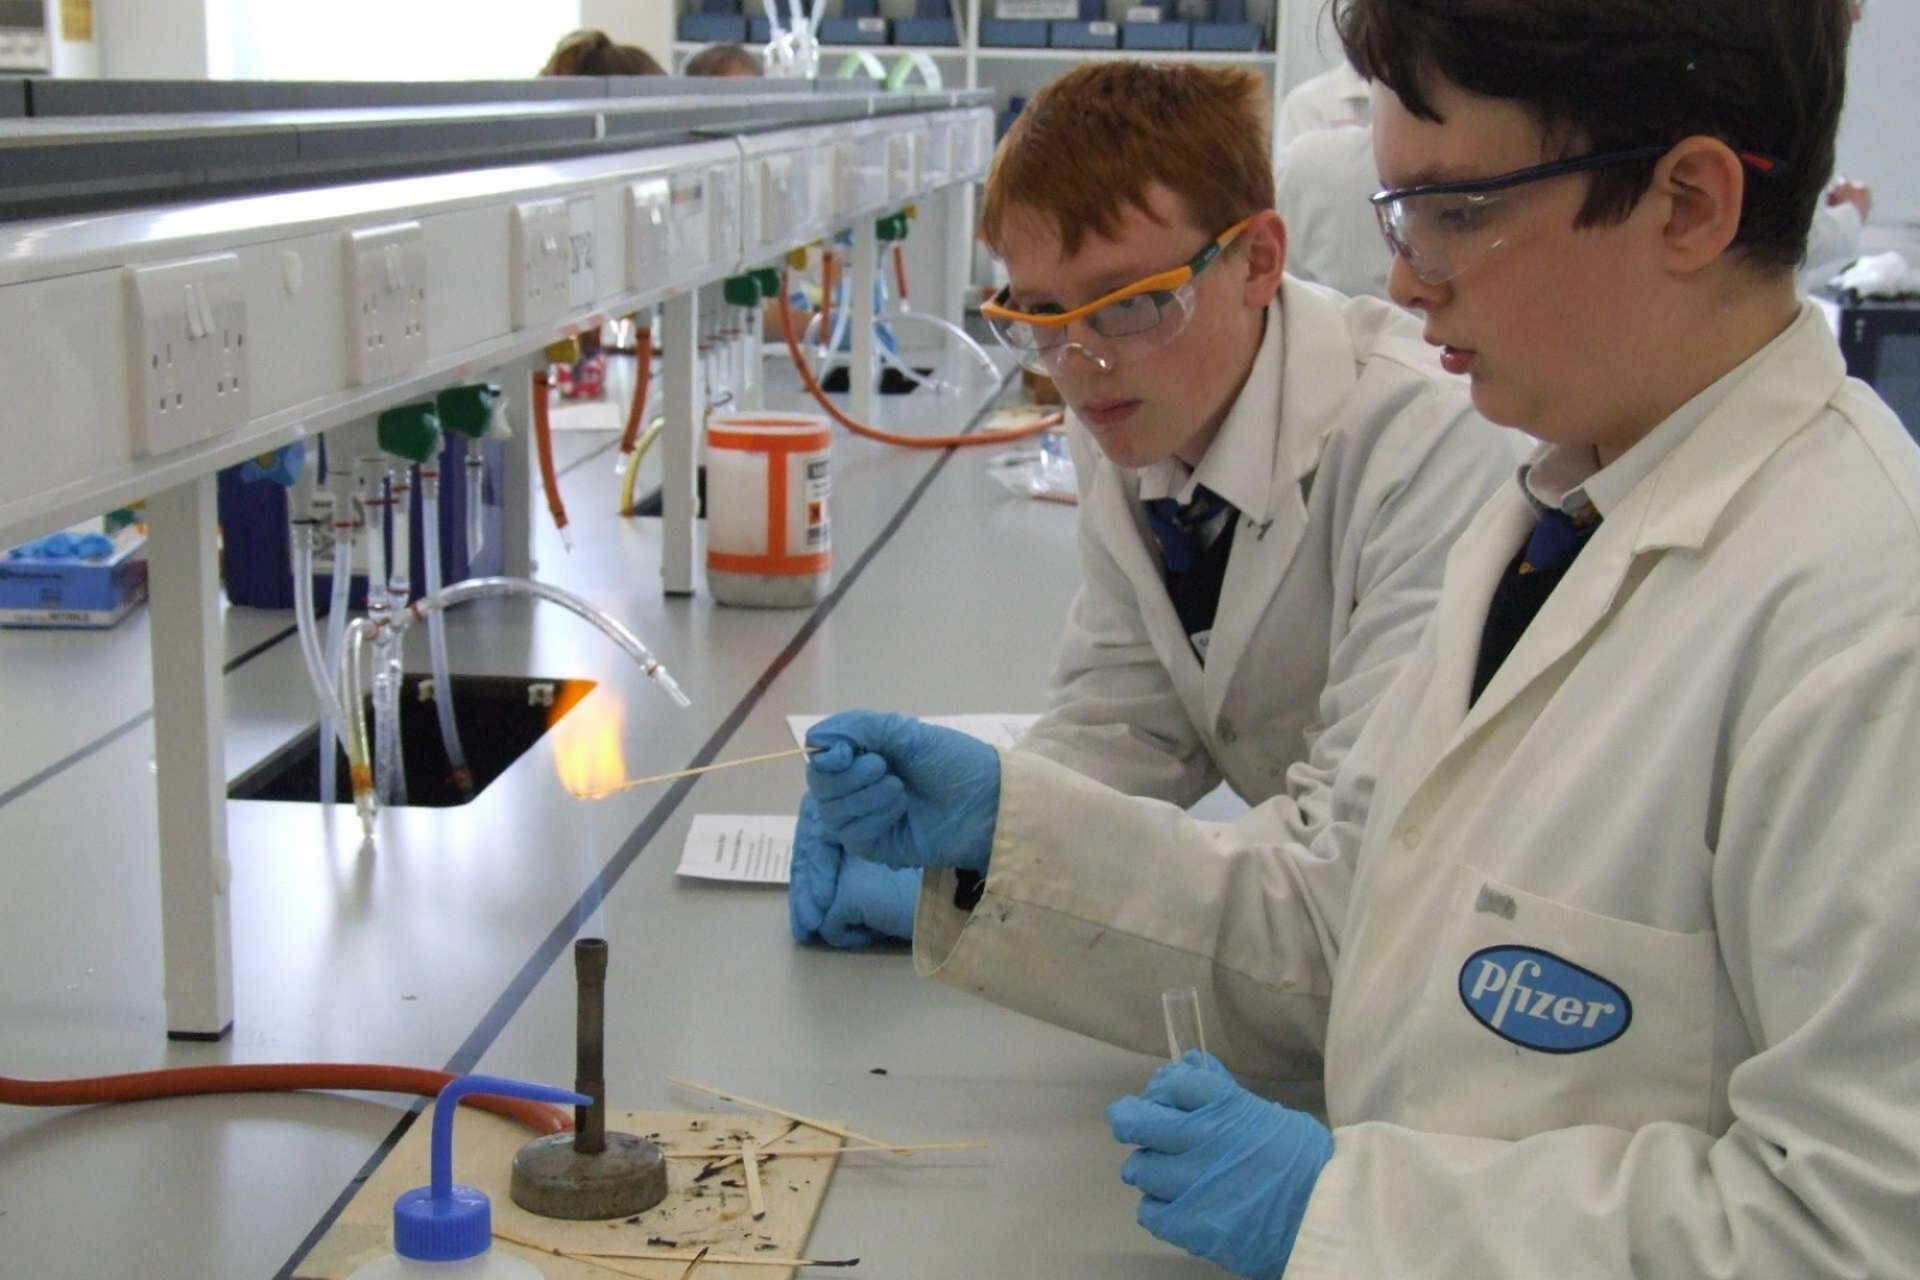 Children learning in a lab setting